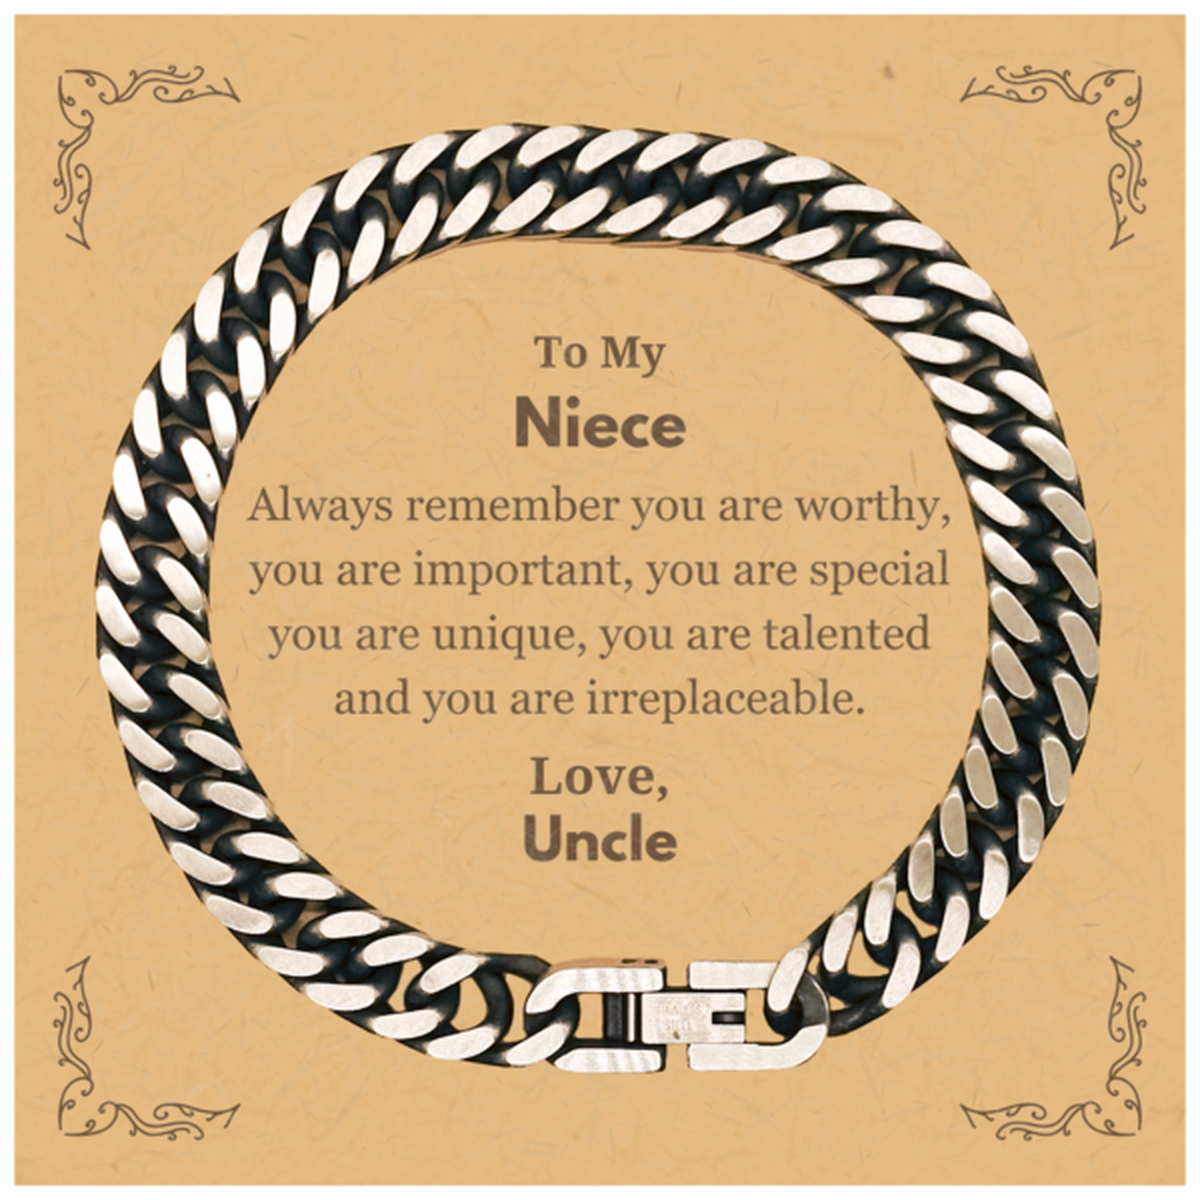 Niece Birthday Gifts from Uncle, Inspirational Cuban Link Chain Bracelet for Niece Christmas Graduation Gifts for Niece Always remember you are worthy, you are important. Love, Uncle